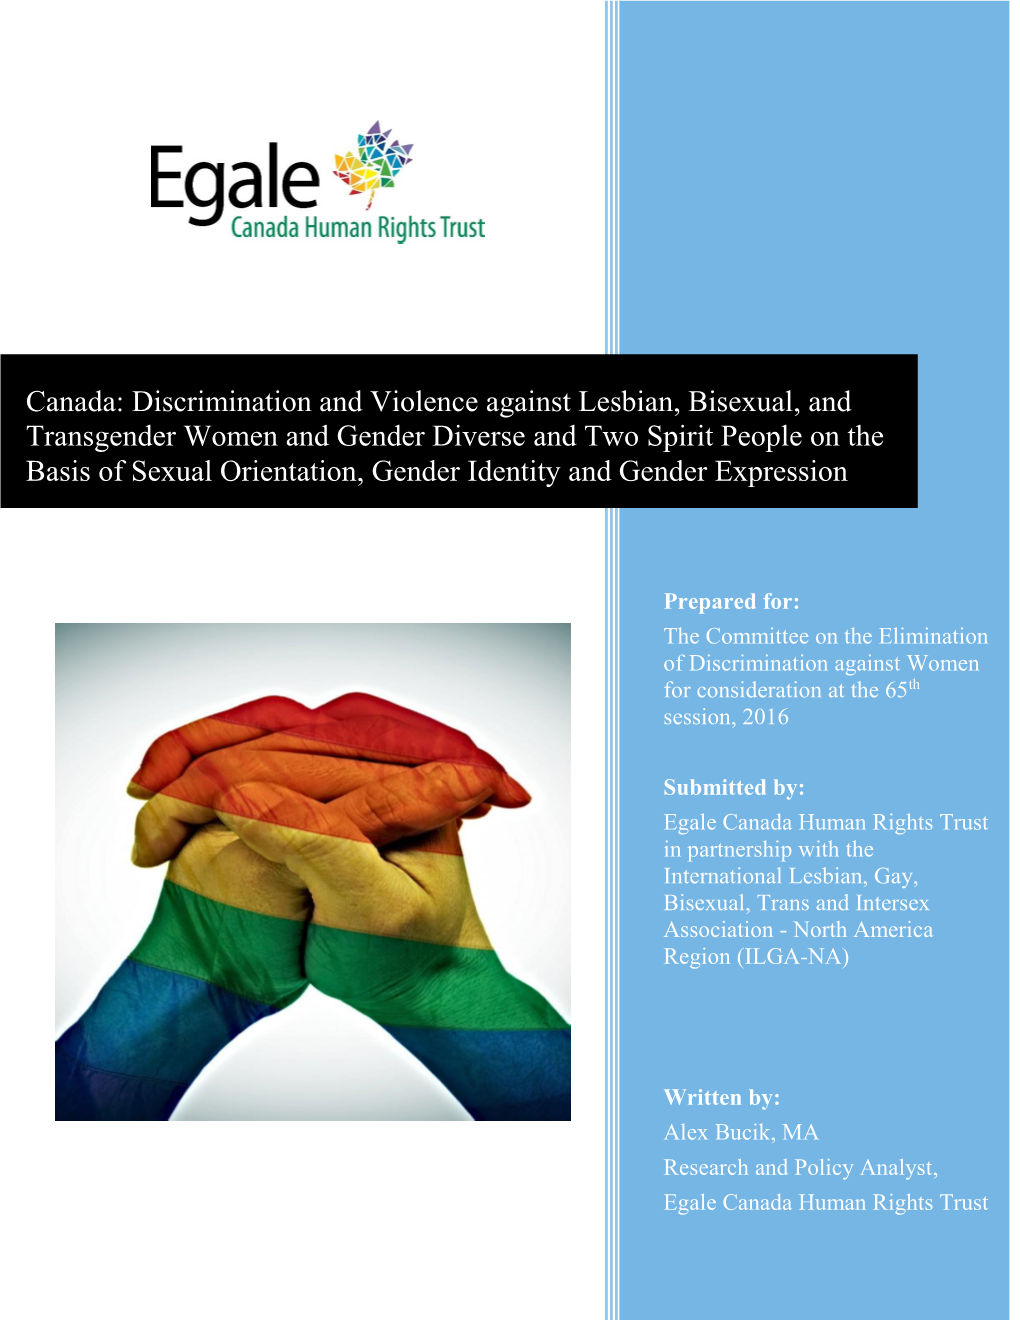 Canada: Discrimination and Violence Against Lesbian, Bisexual, And